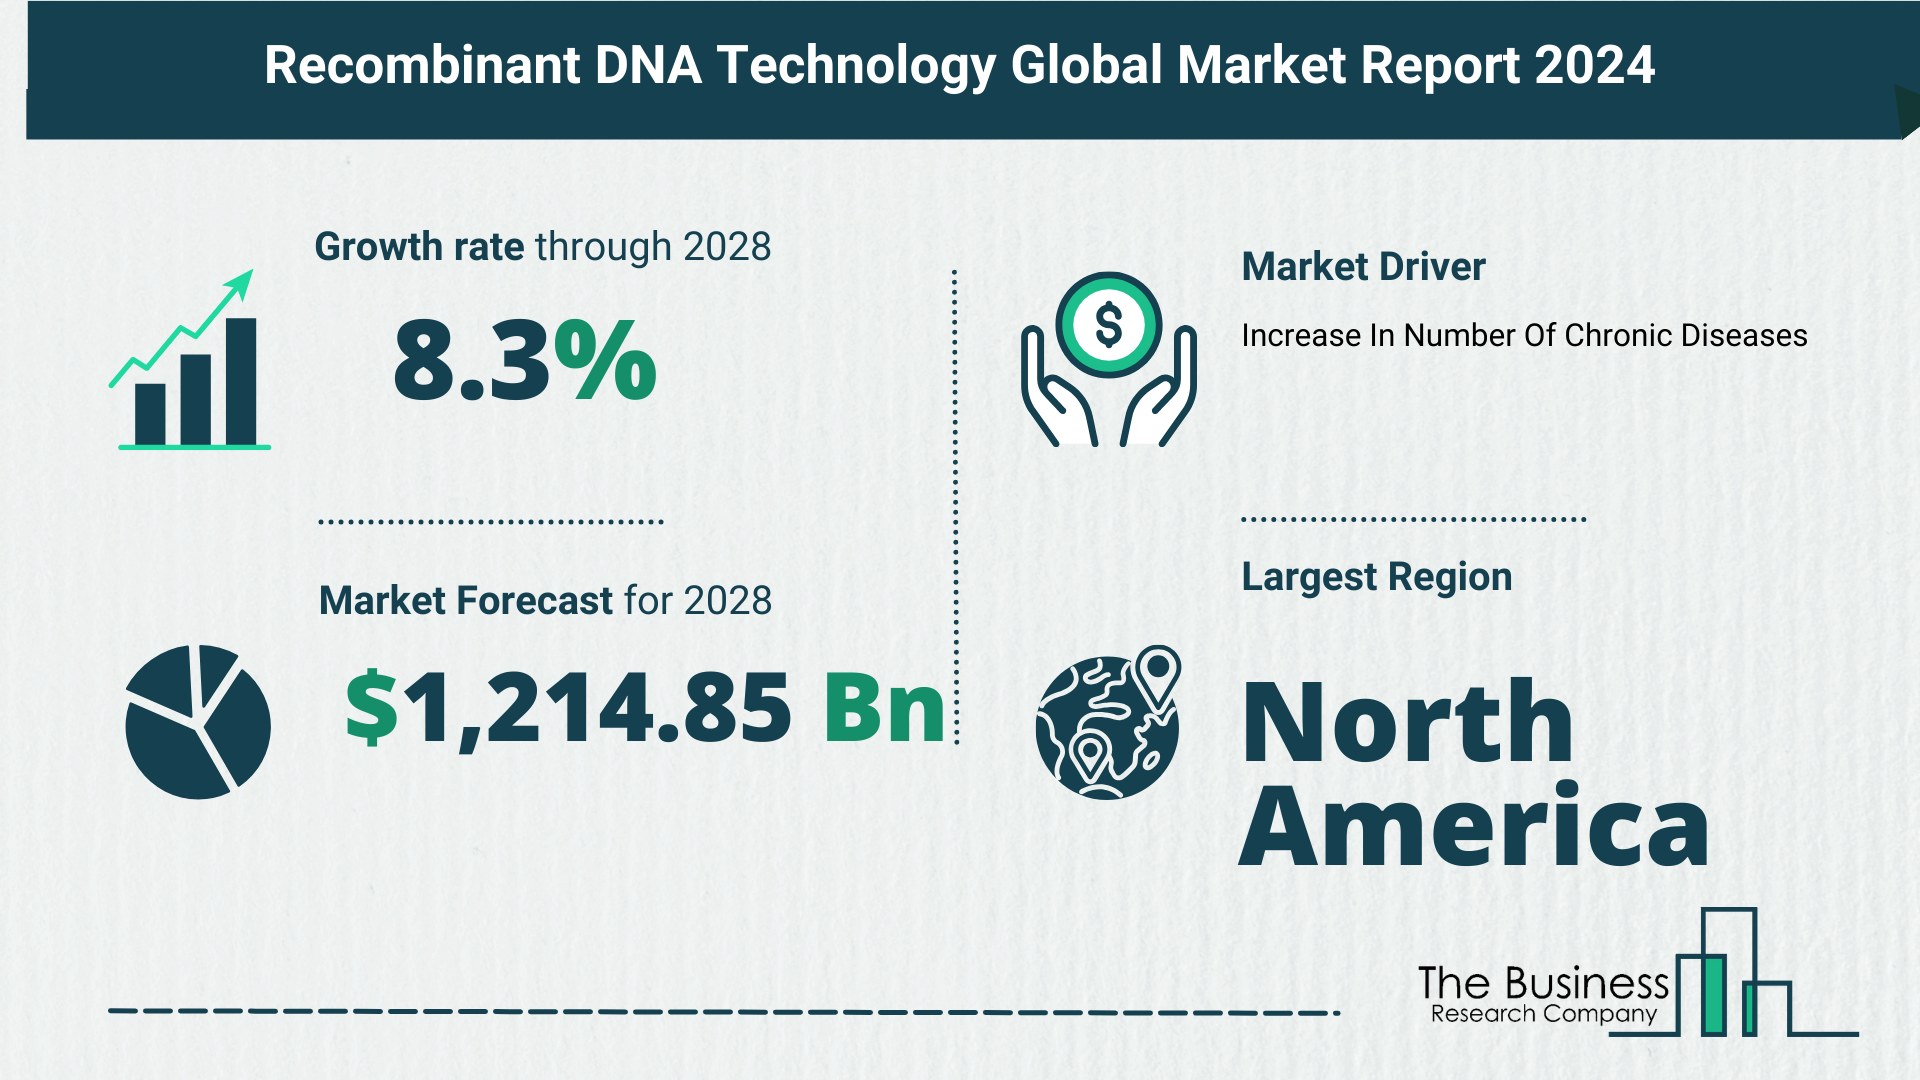 5 Key Insights On The Recombinant DNA Technology Market 2024